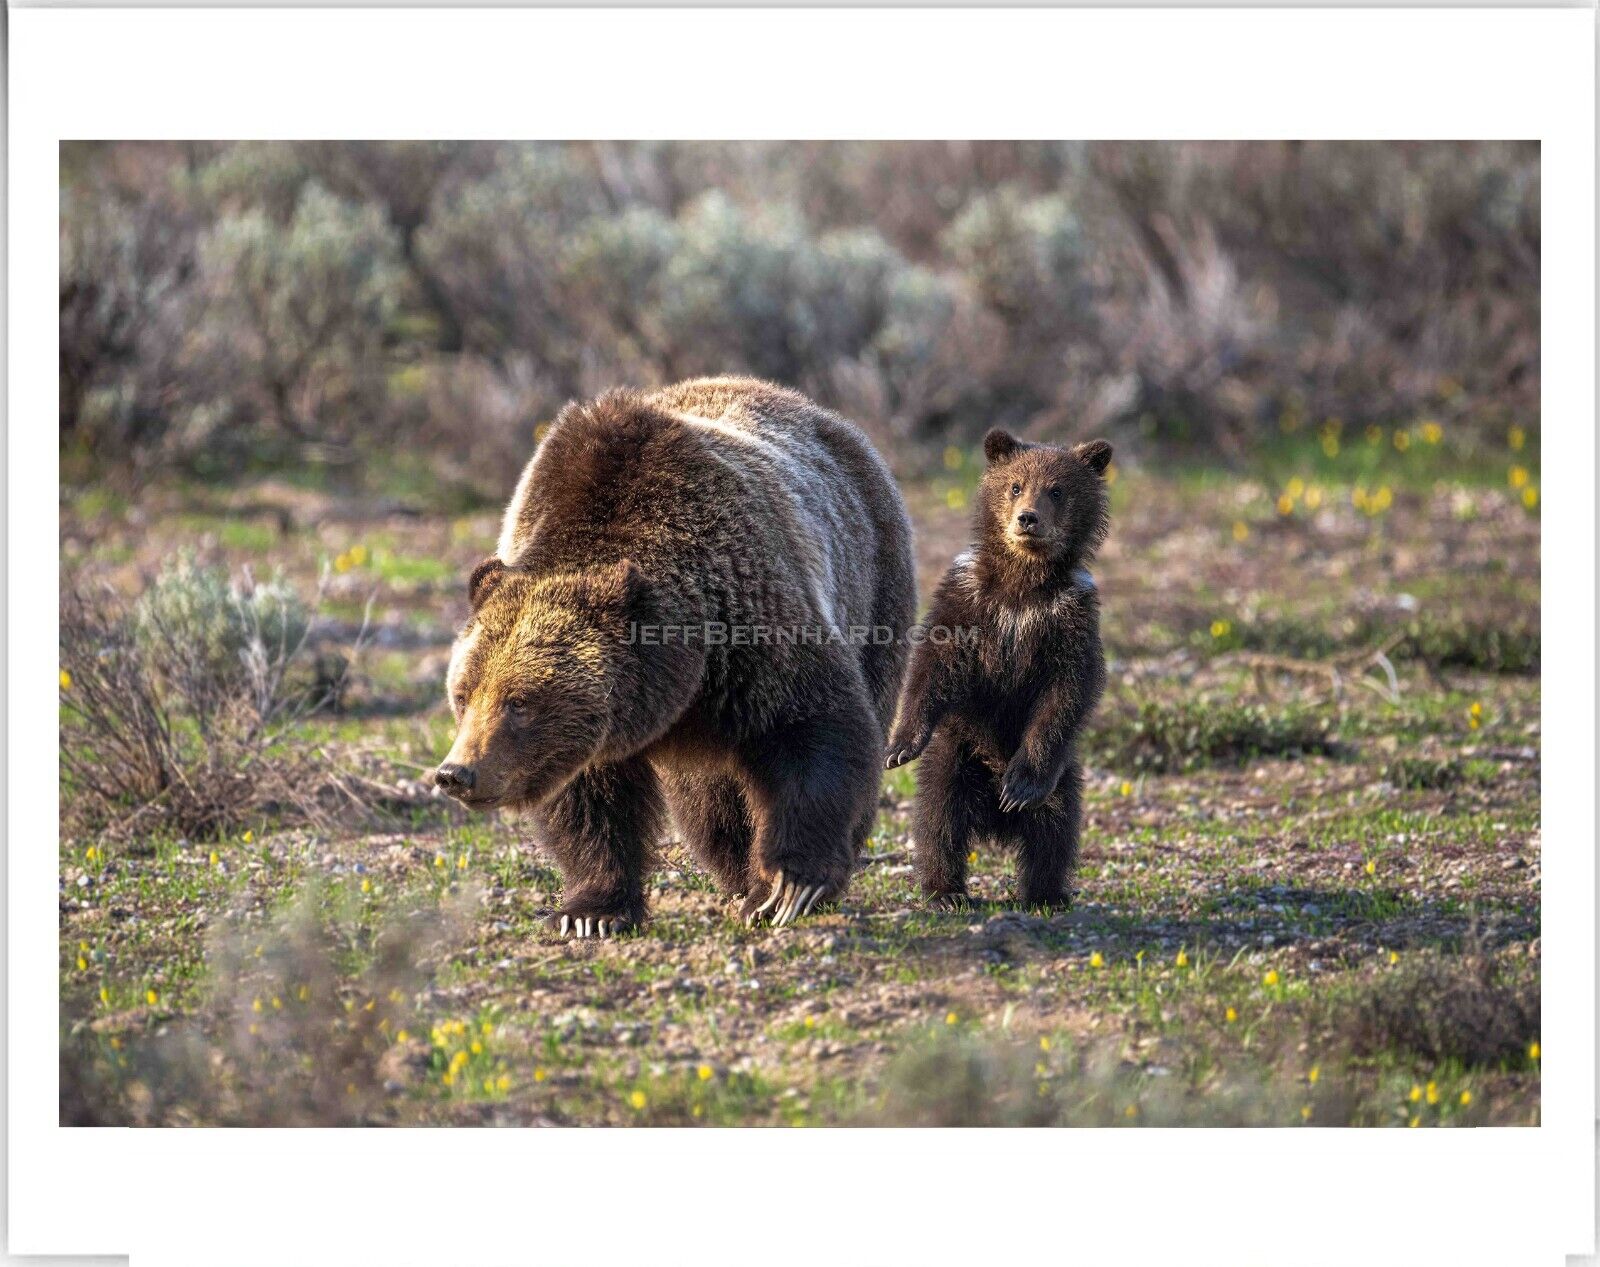 Grizzly Bear 399 with COY 2023 Limited Edition Photo 8x10 Matted for 11x14